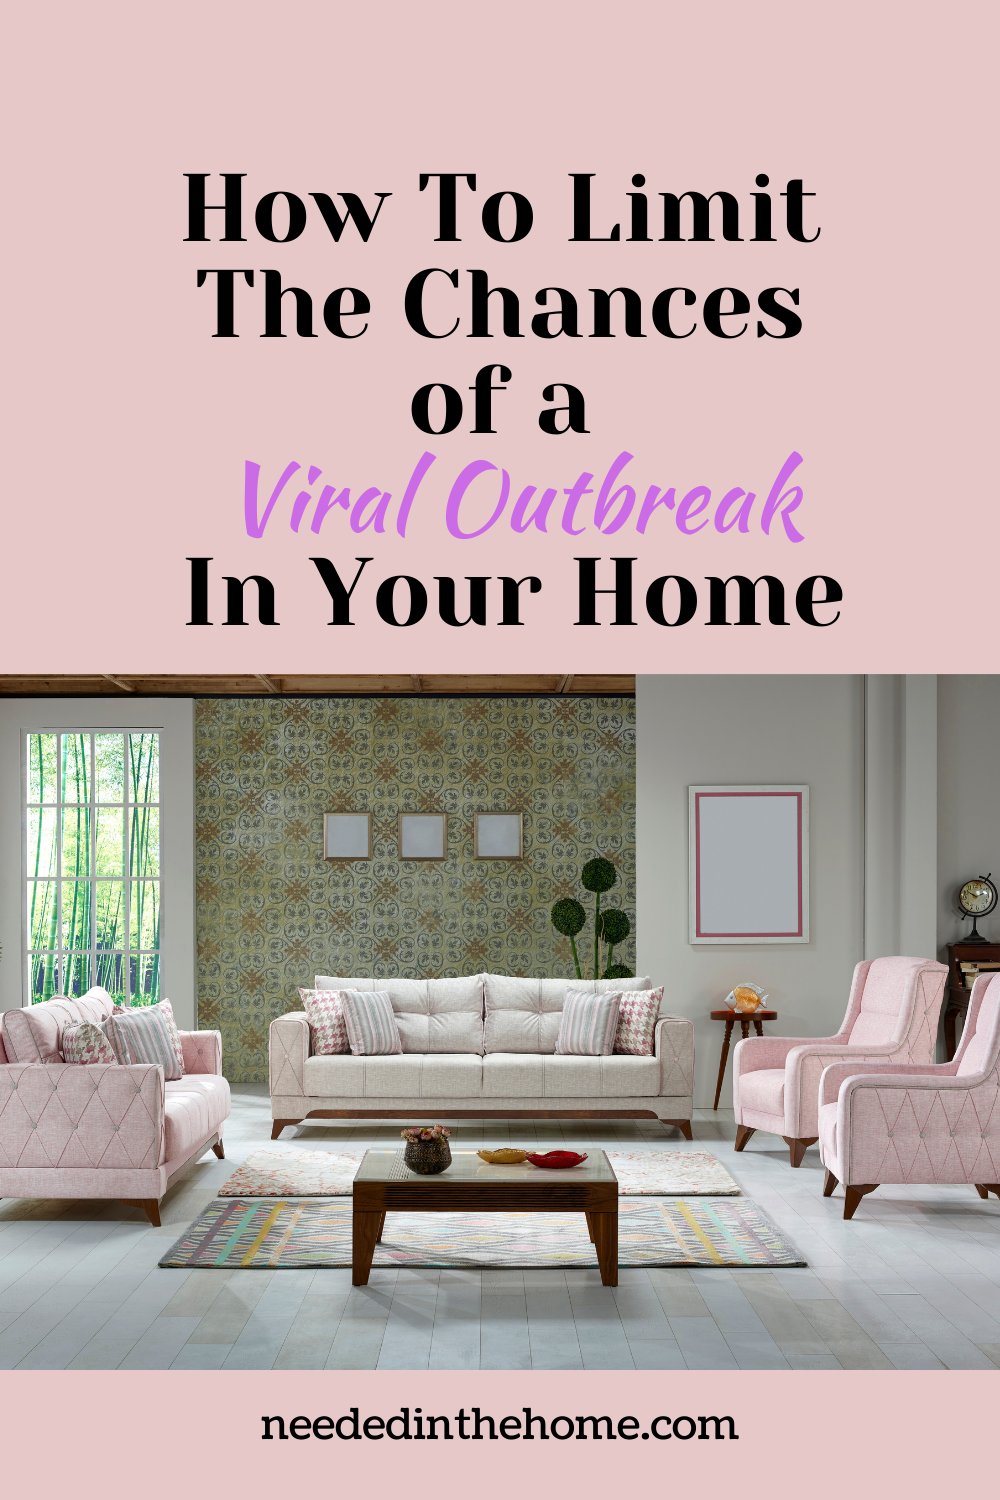 pinterest-pin-description How To Limit The Chances of a Viral Outbreak In Your Home living room furniture spaced six feet apart neededinthehome